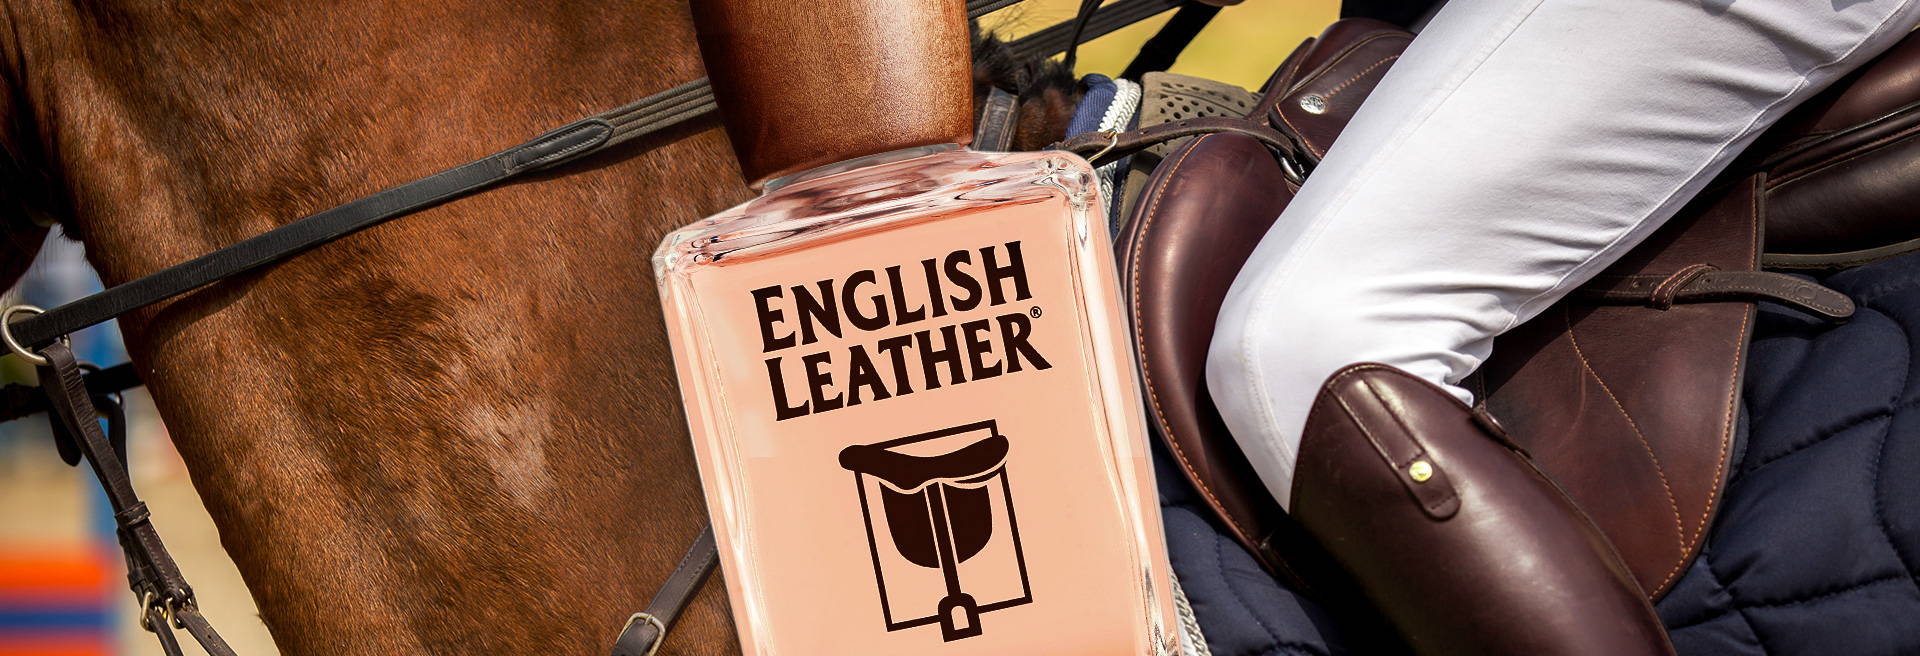 English Leather Fragrance Review, Old School Classic Fragrance